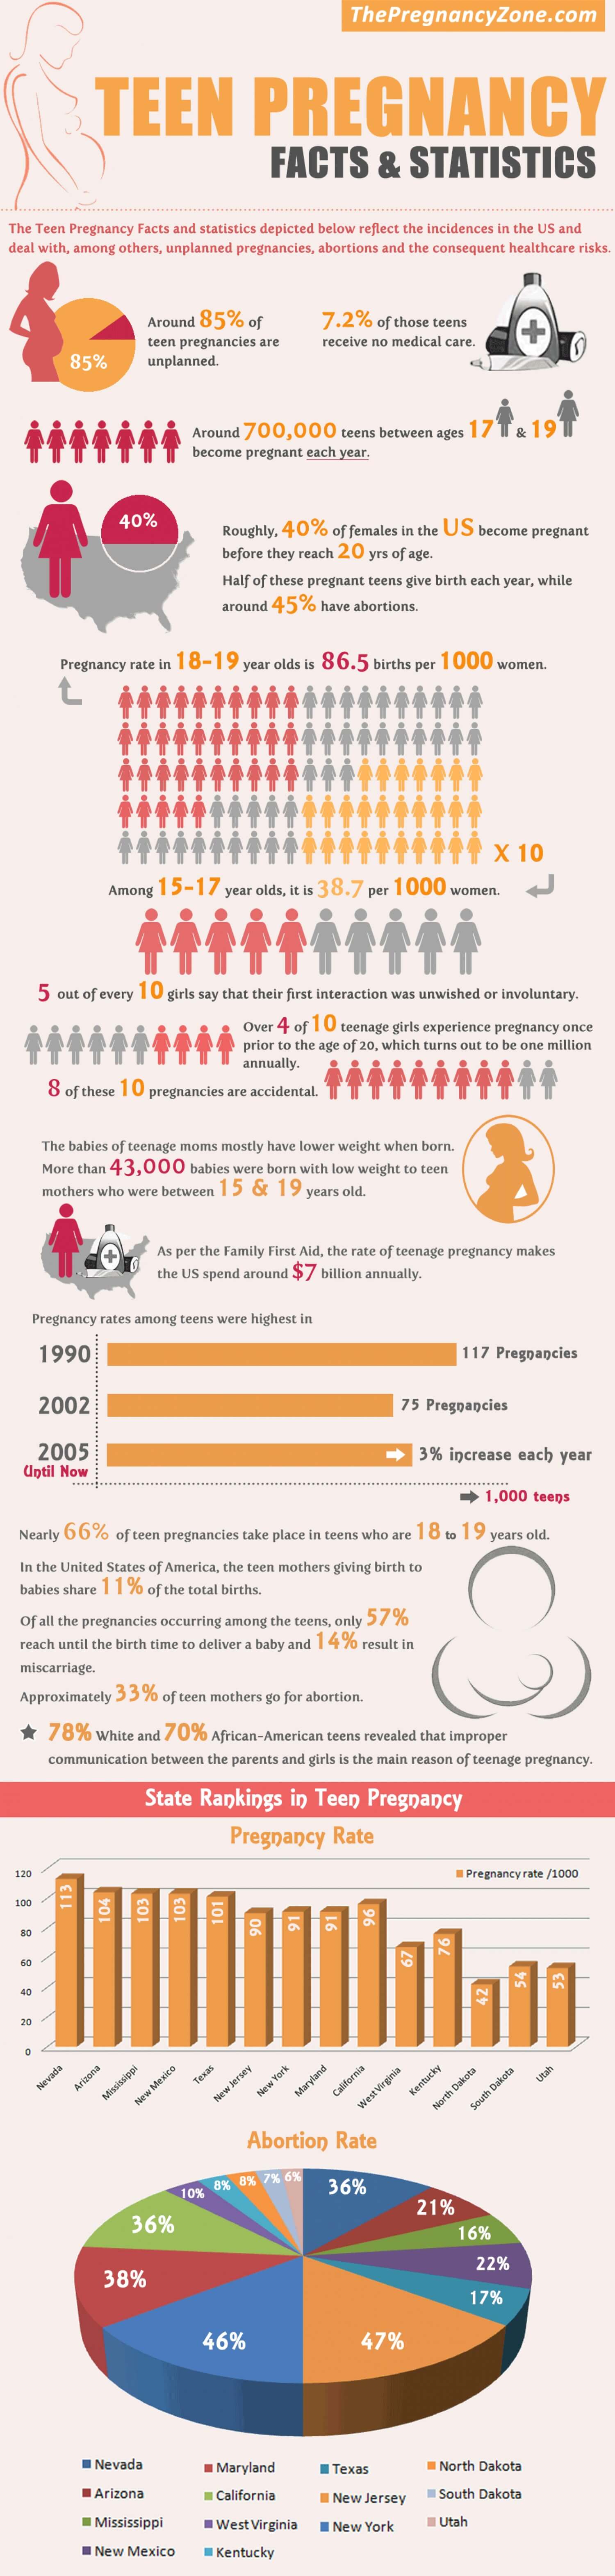 Teen Pregnancy Facts and Statistics